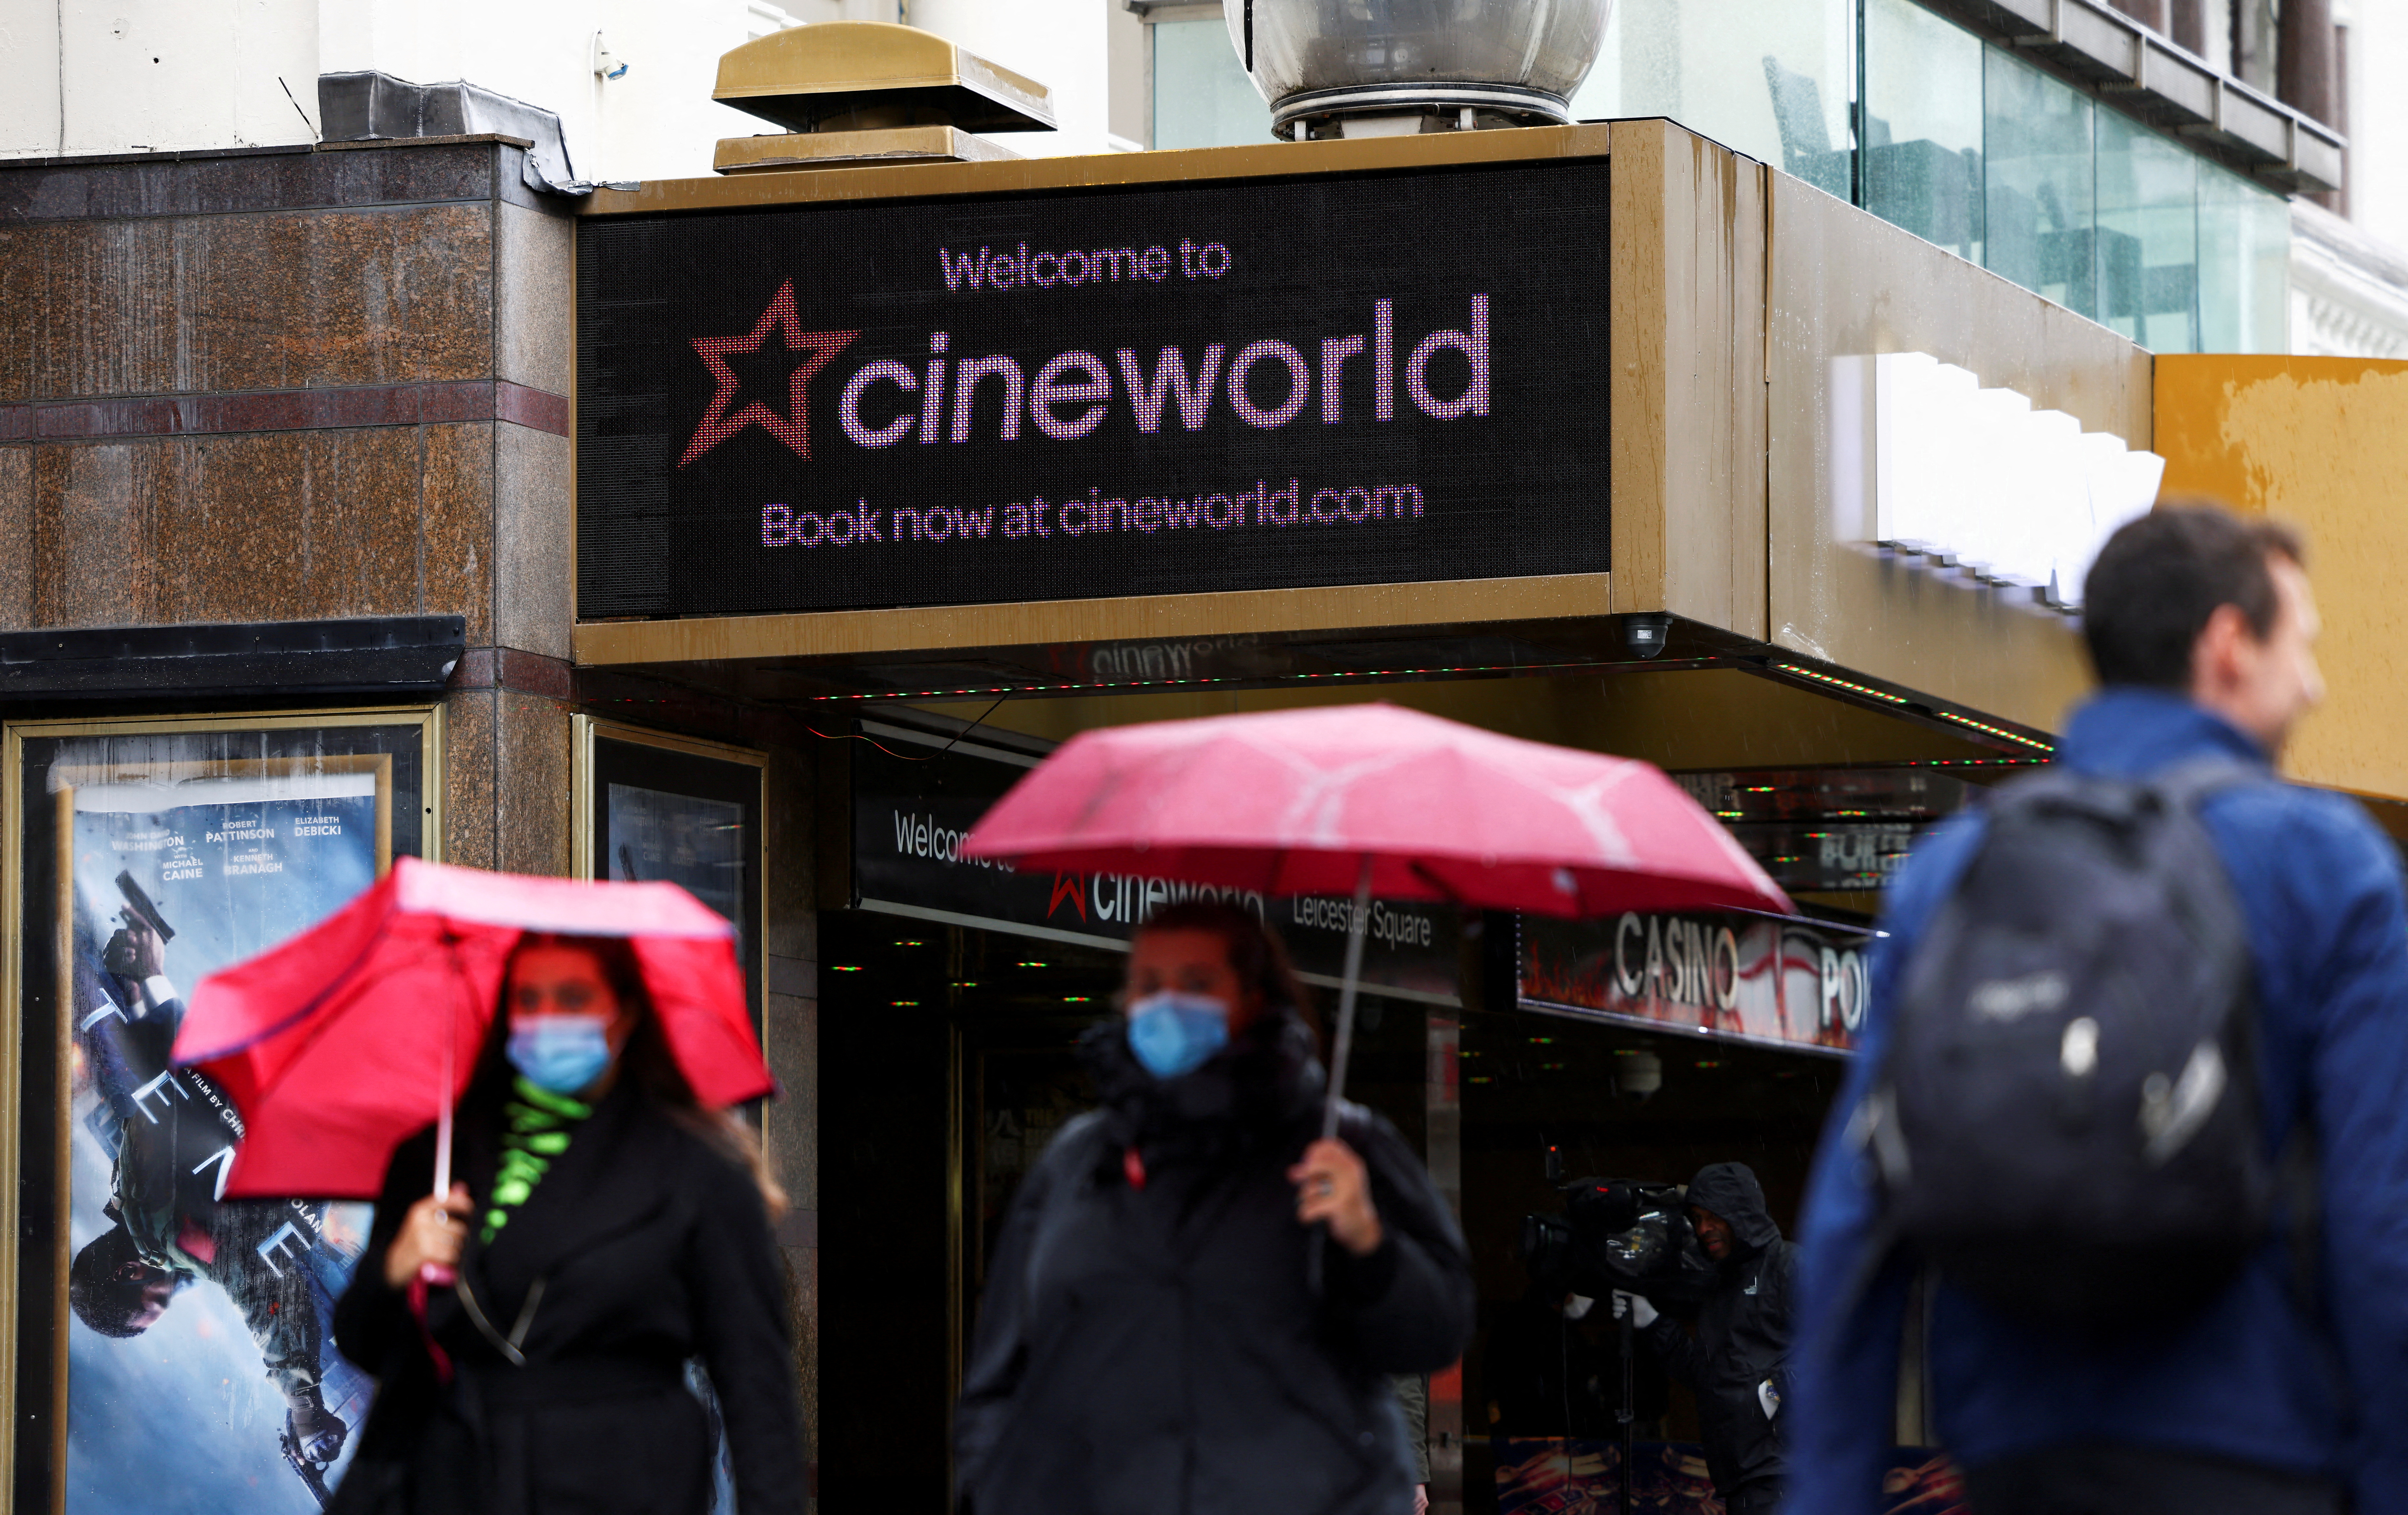 People walk past a Cineworld in Leicester's Square, amid the coronavirus disease (COVID-19) outbreak in London, Britain, October 4, 2020. REUTERS/Henry Nicholls